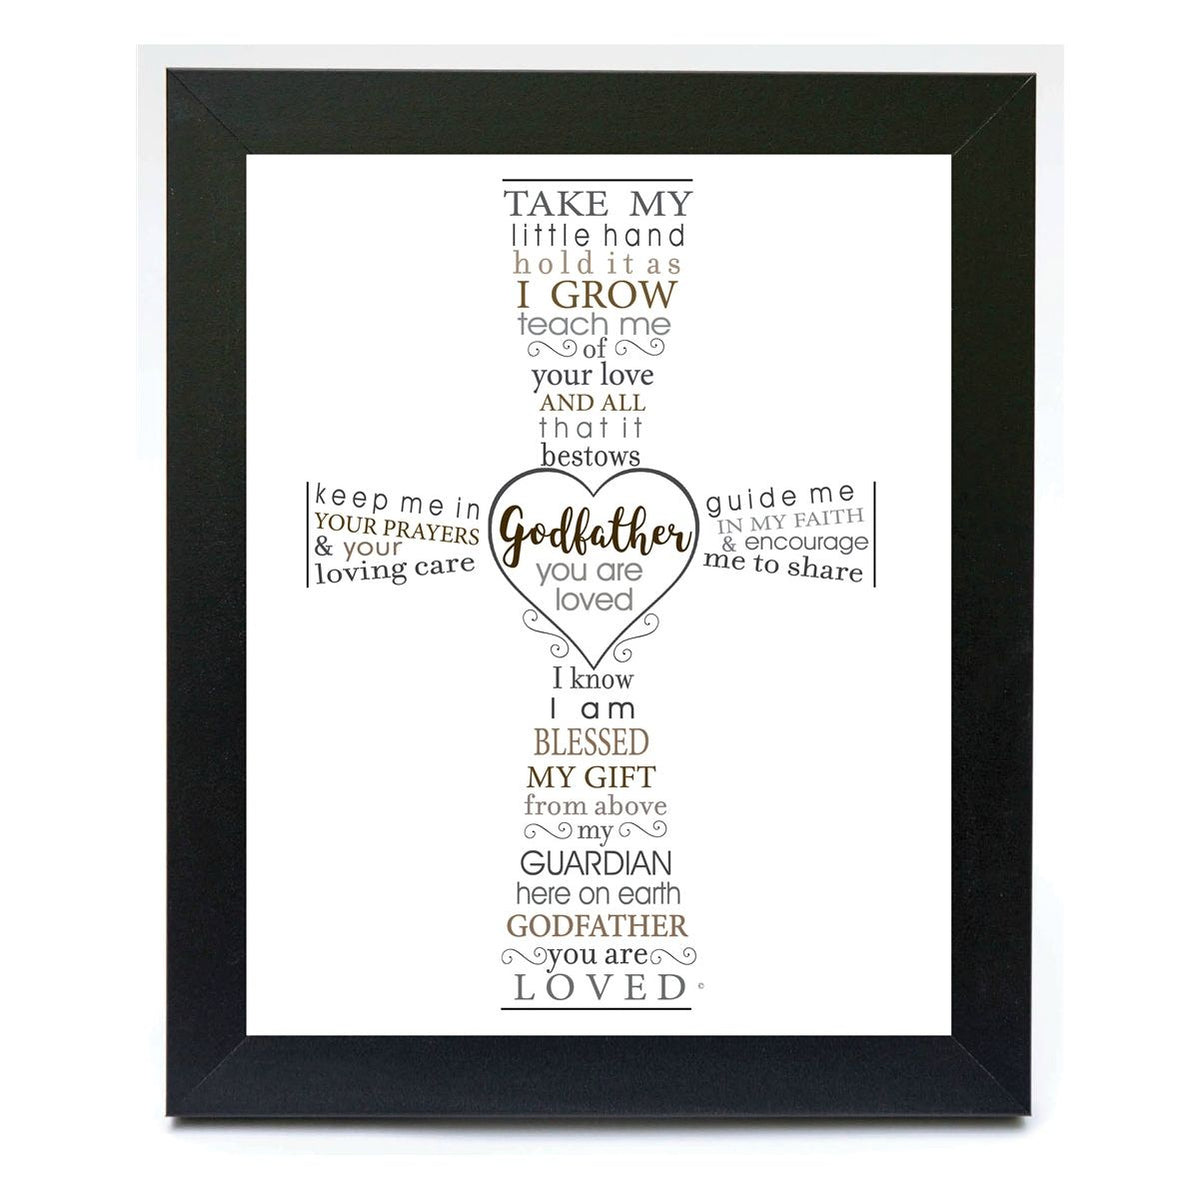 8x10 black frame with &quot;Godfather you are loved&quot; poem.